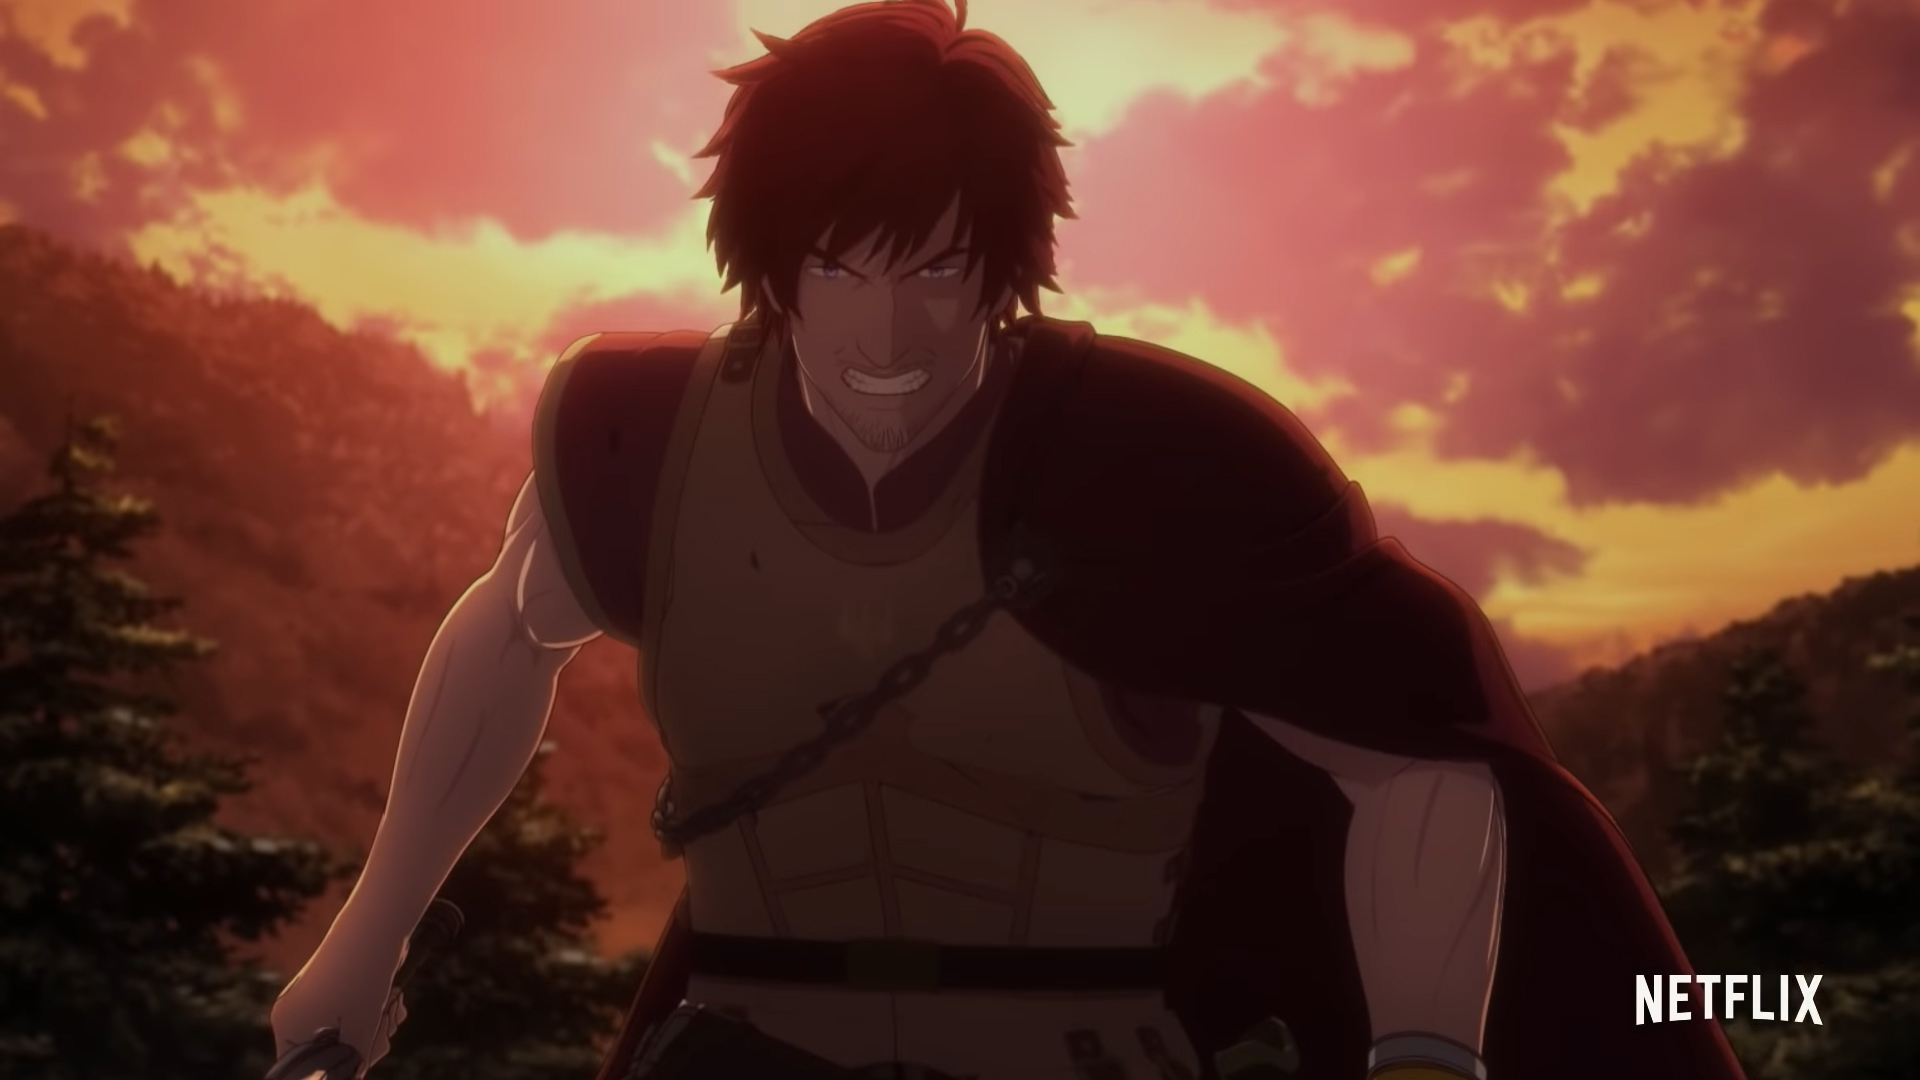 The Dragons Dogma Anime Prepares for Battle in Its First Trailer